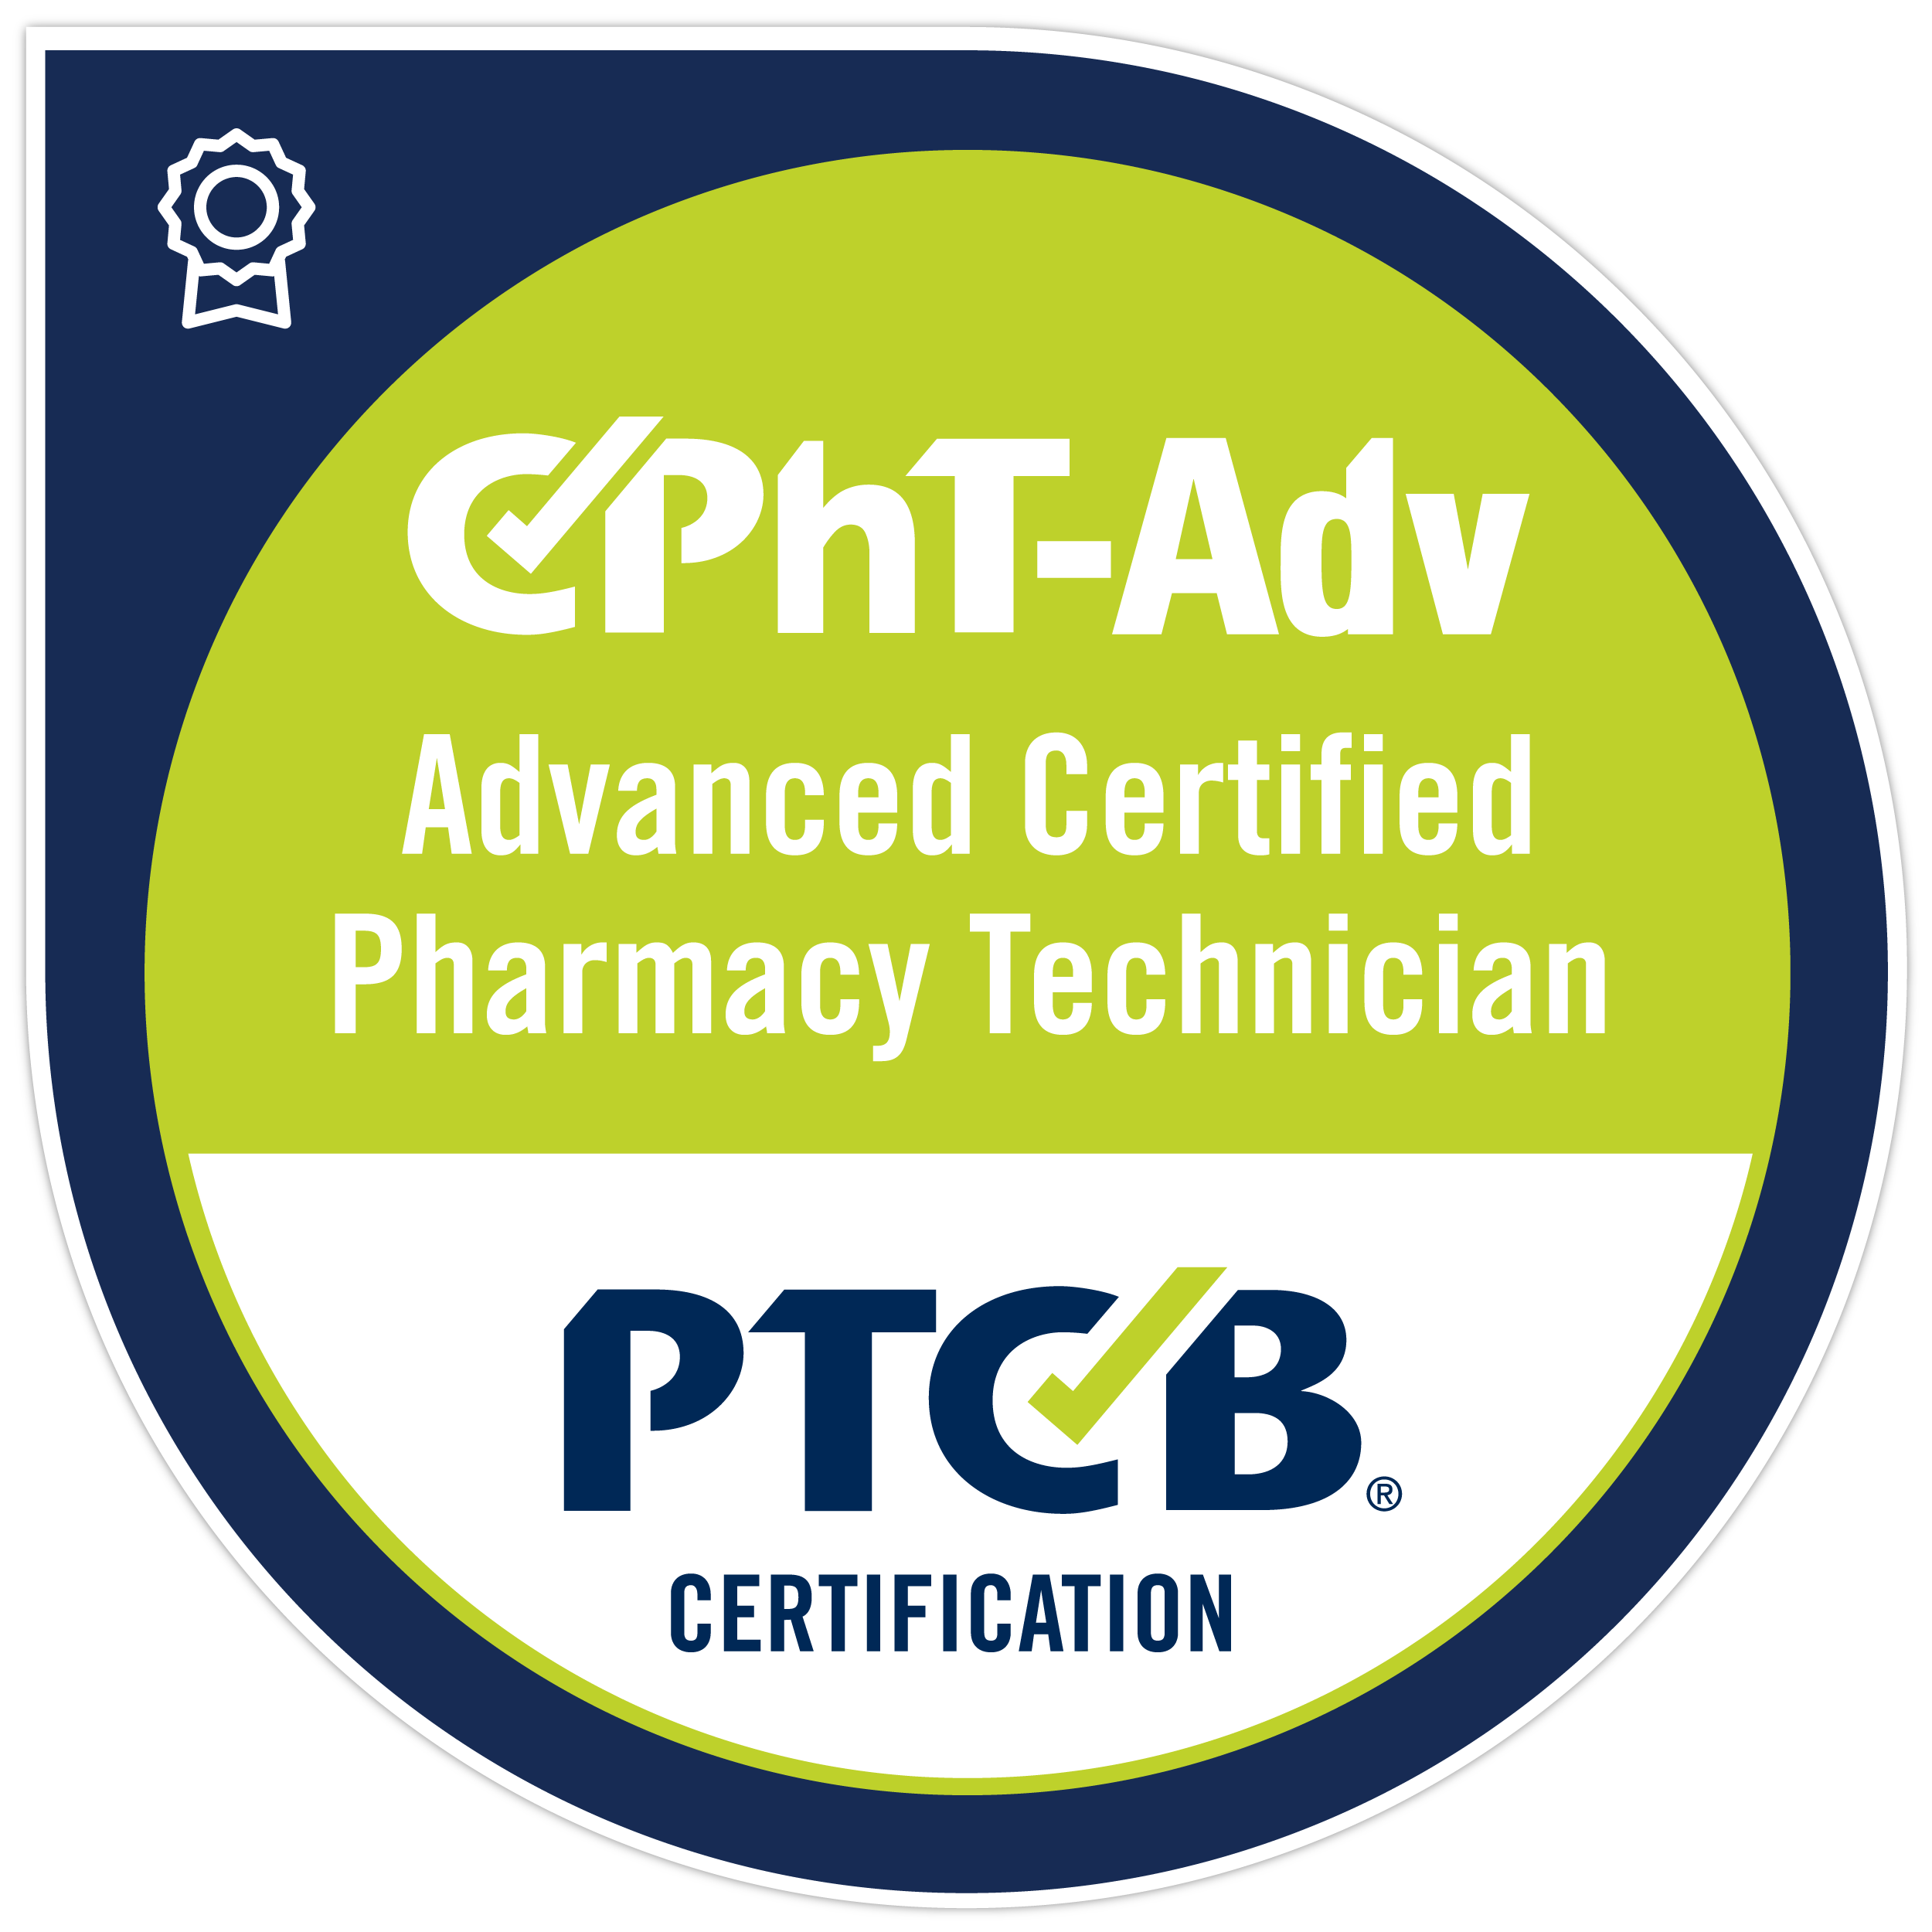 Advanced Certified Pharmacy Technician (Cpht-Adv) - Credentials - Ptcb